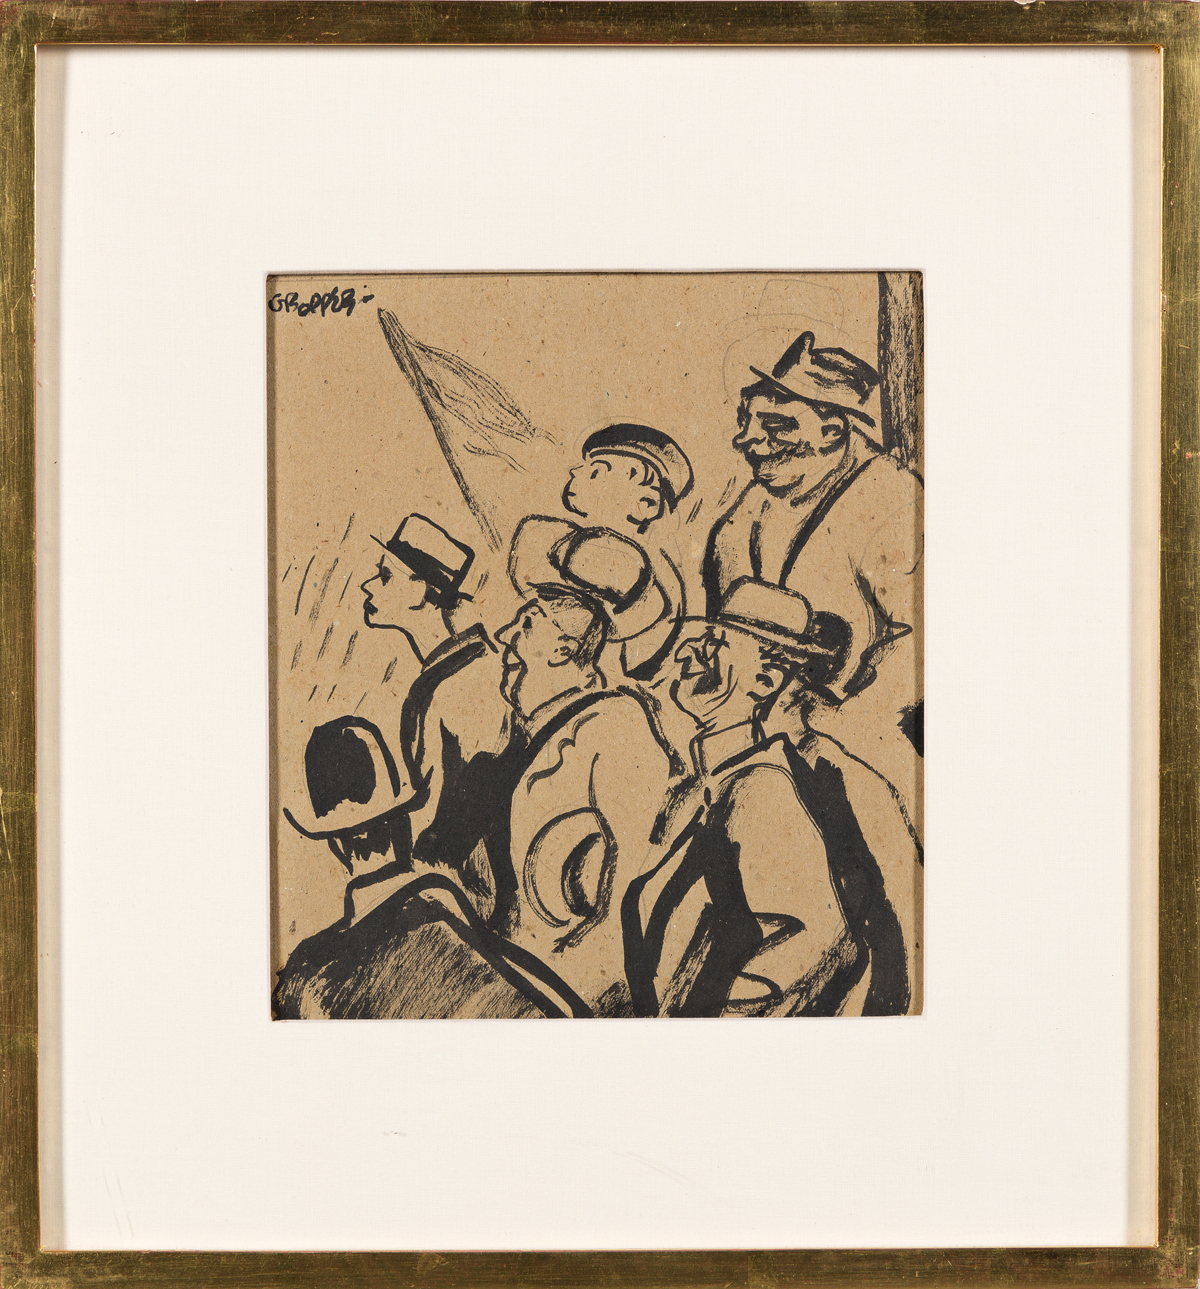 WILLIAM GROPPER Group of 7 ink drawings of the Democratic National Convention, New York.